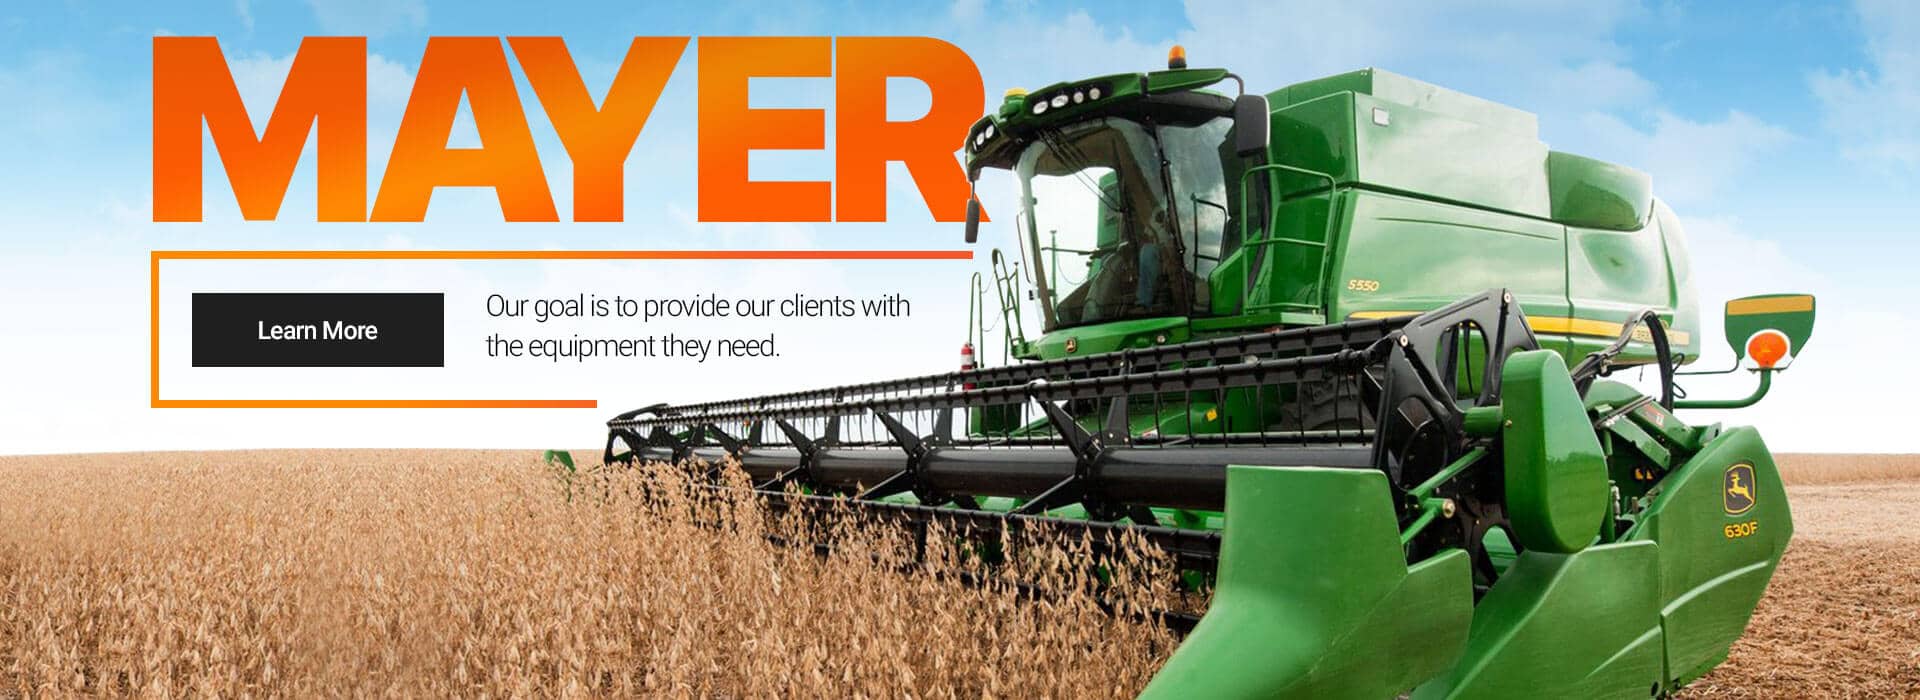 Mayer Agri Equipment - Read more About Us